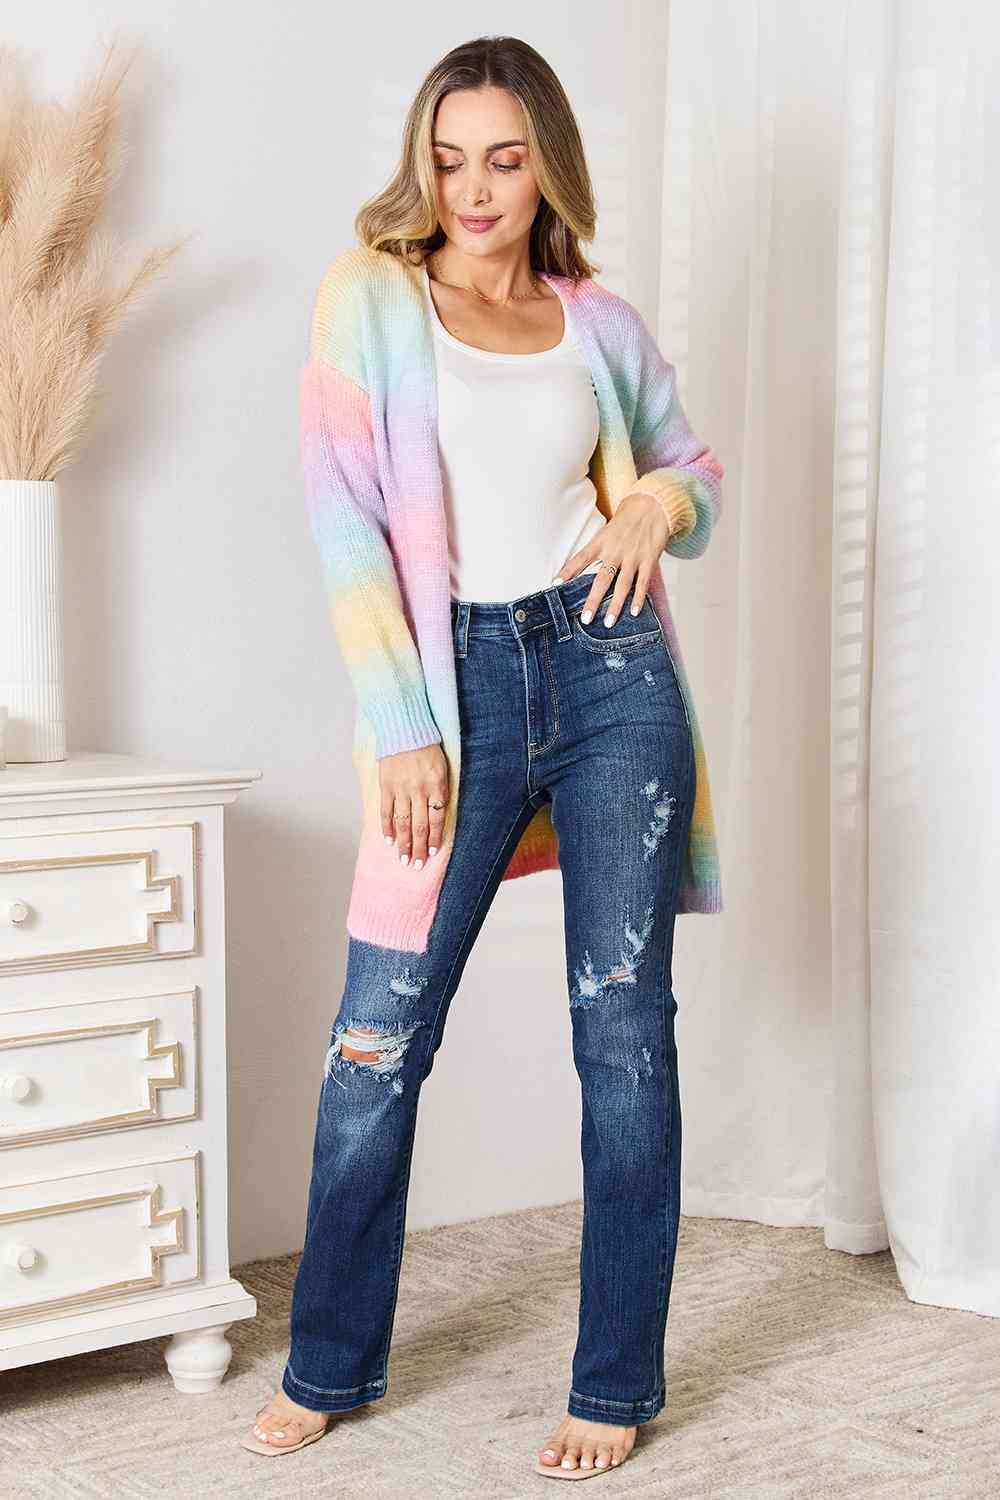 Rainbow Dreams Gradient Open Front Longline Cardigan - Southern Soul Collectives